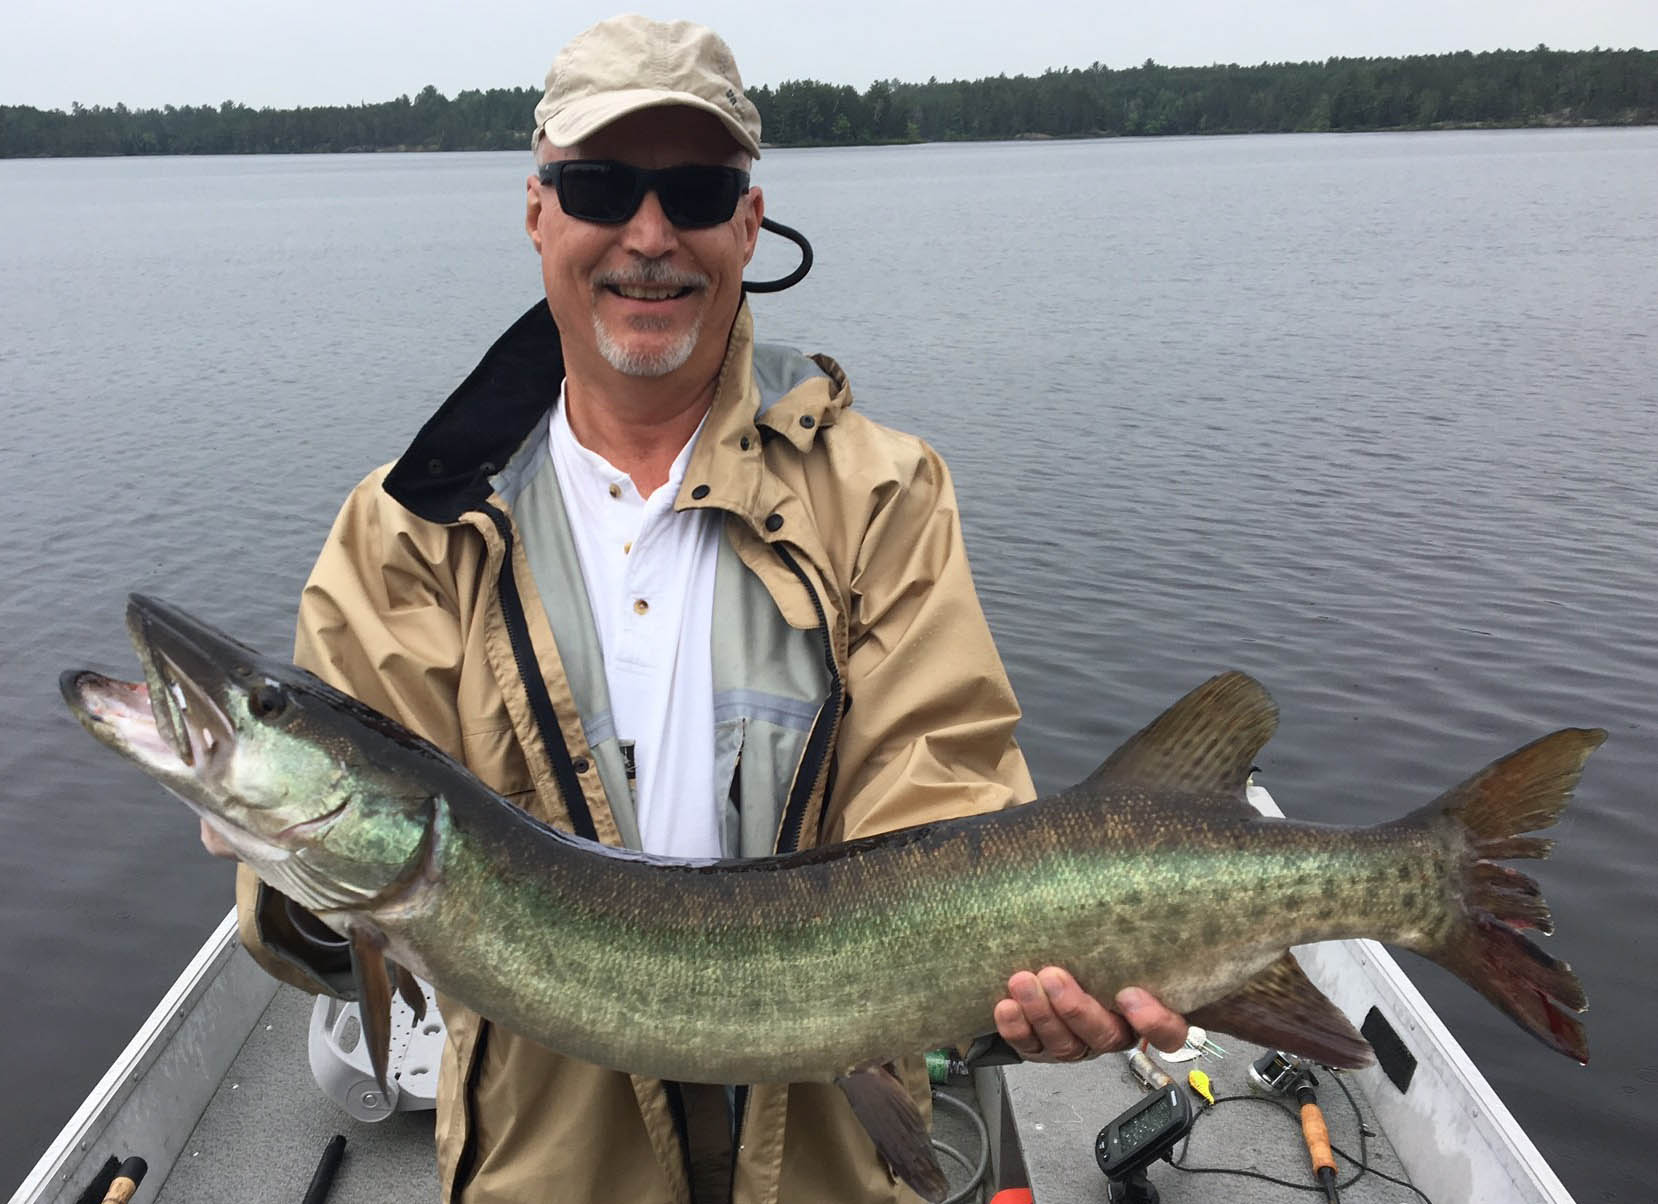 Dan holding a muskie caught on the French River in Monetville, Ontario